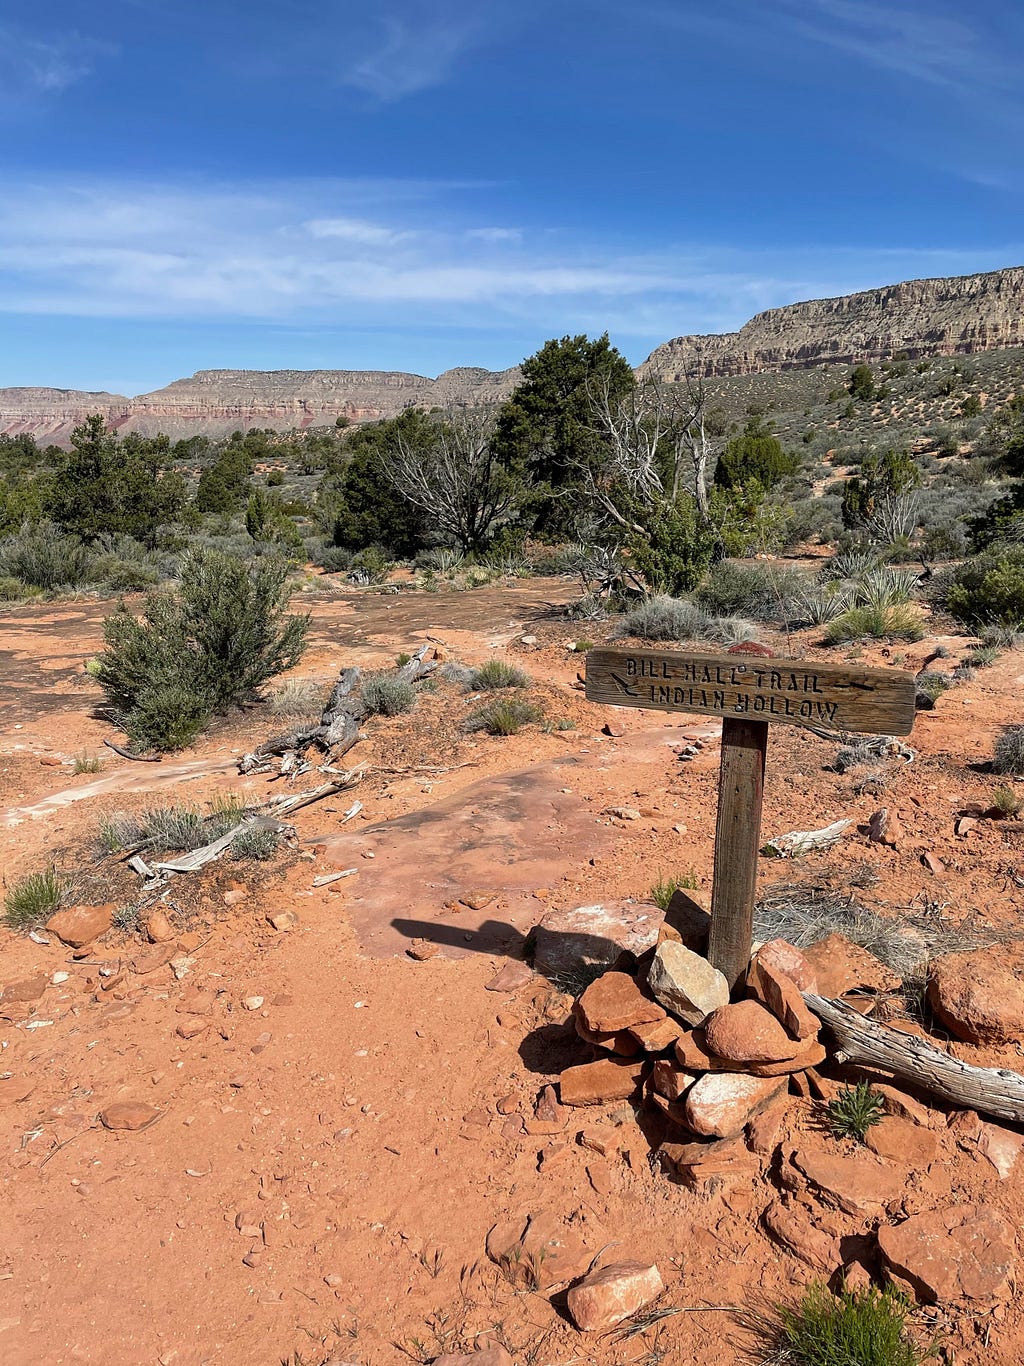 Trail sign showing the junction of Bill Hall and Indian Hollow trails in the Grand Canyon.